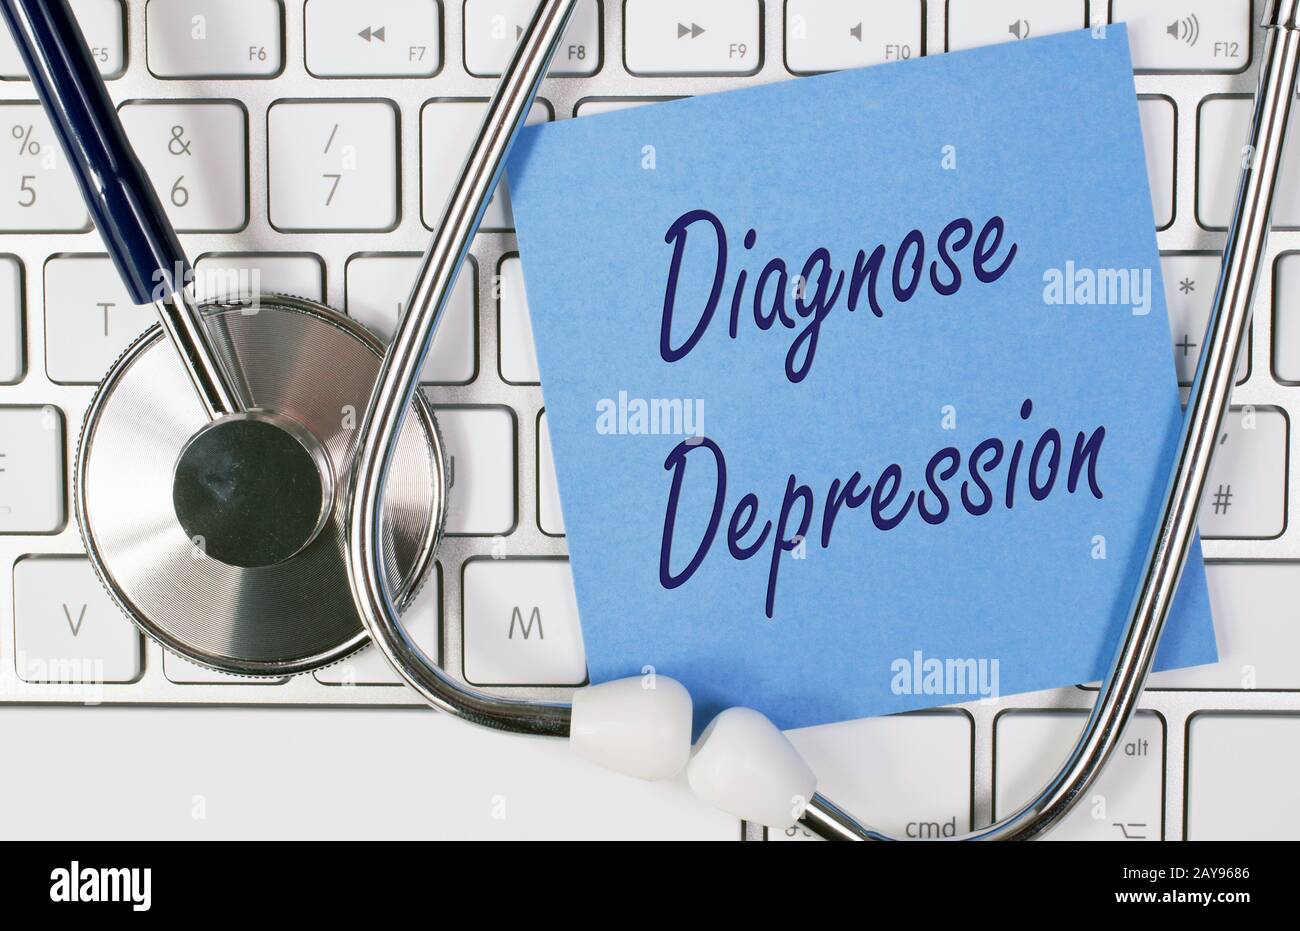 diagnosis depression doctor doctor visit Stock Photo